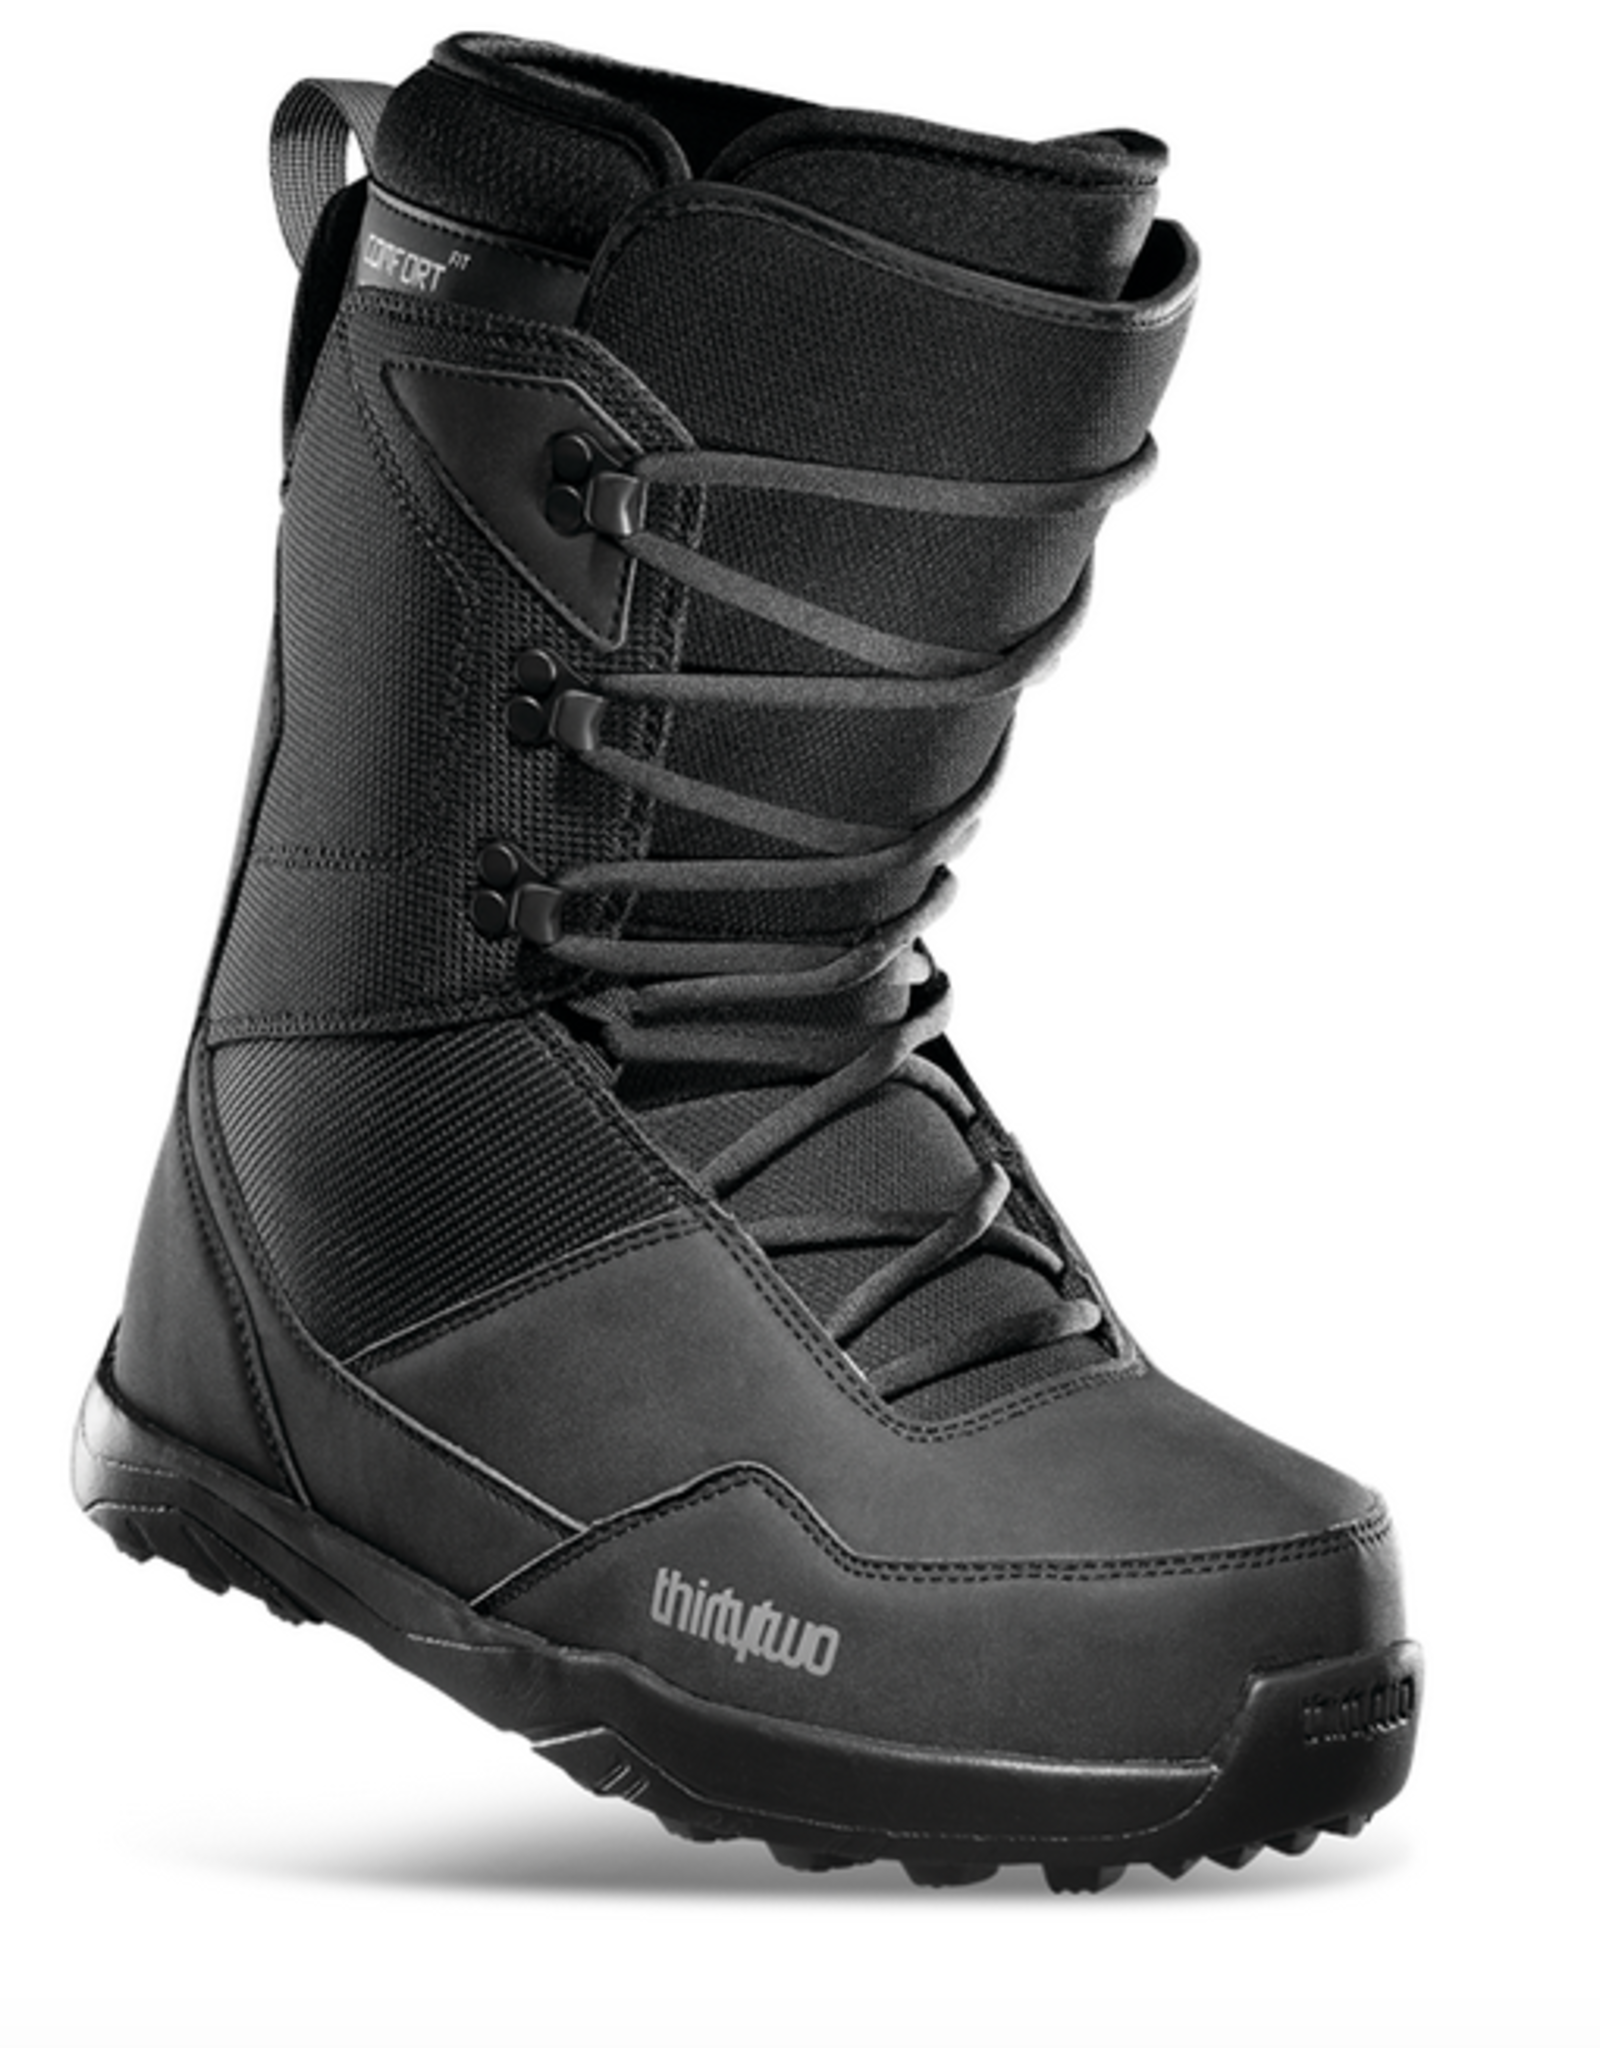 32 THIRTY TWO 32 2022 W'S SHIFTY SNOWBOARD BOOTS